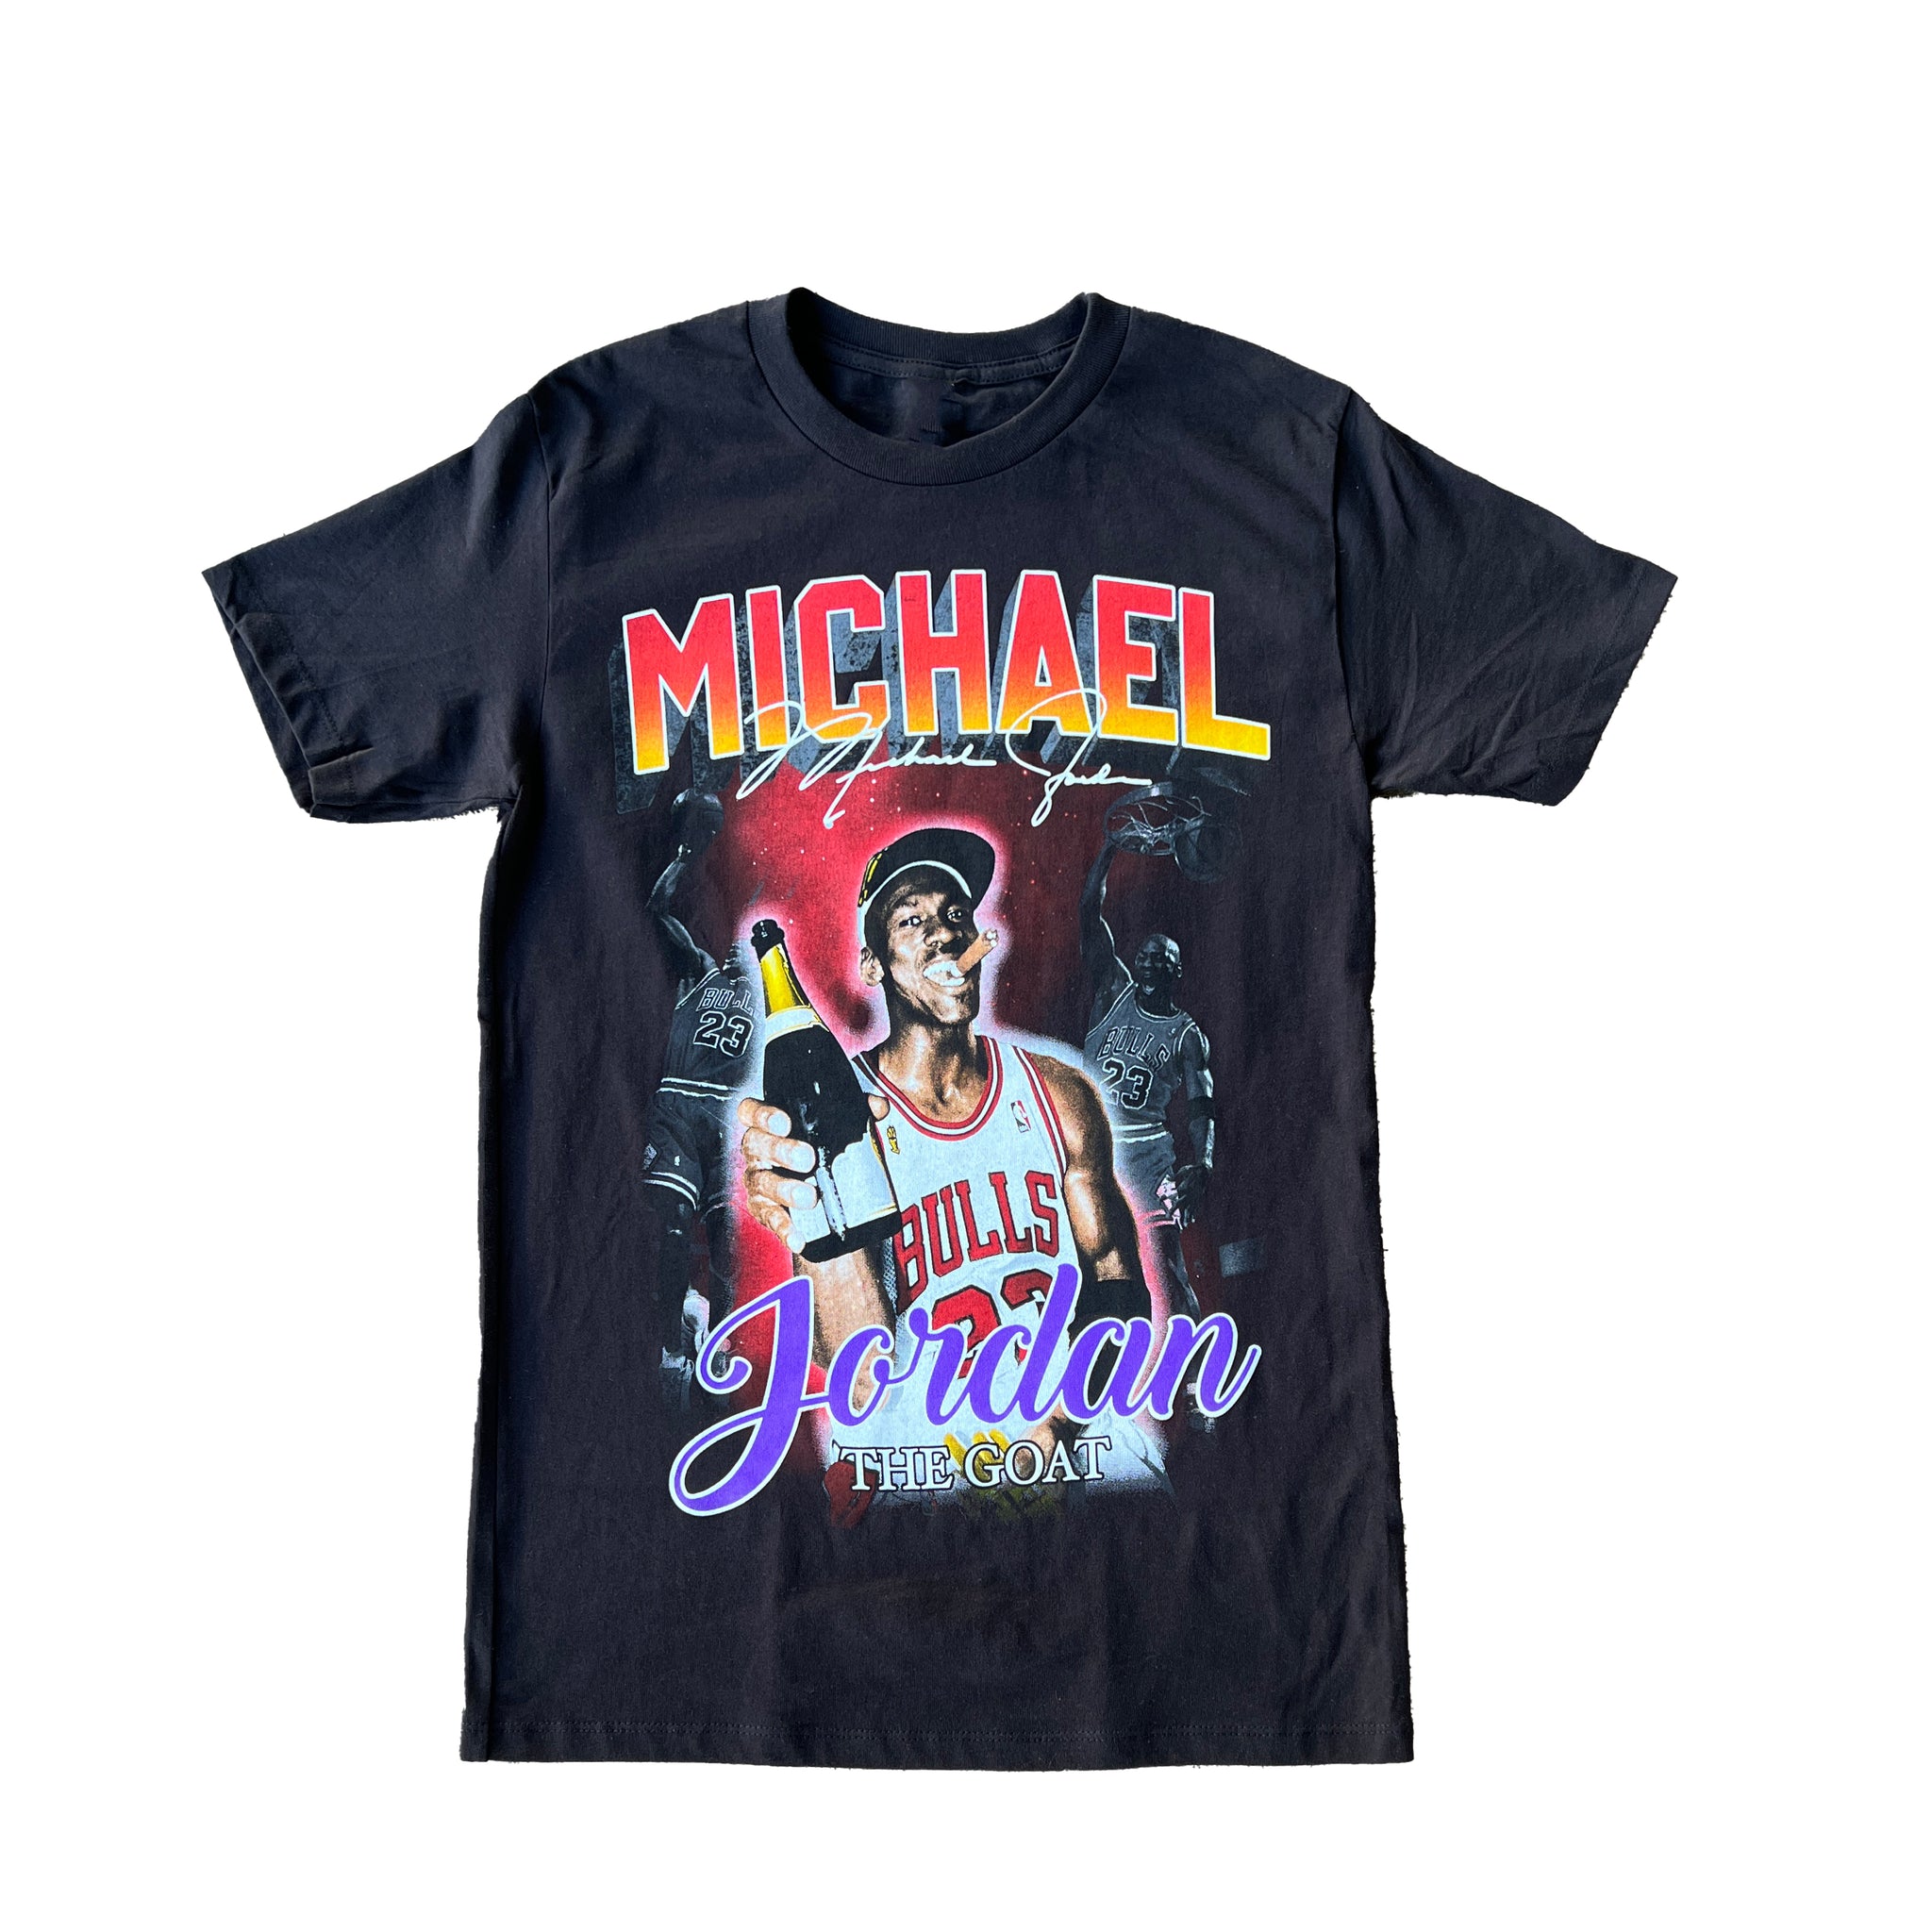 graphic tees for jordans